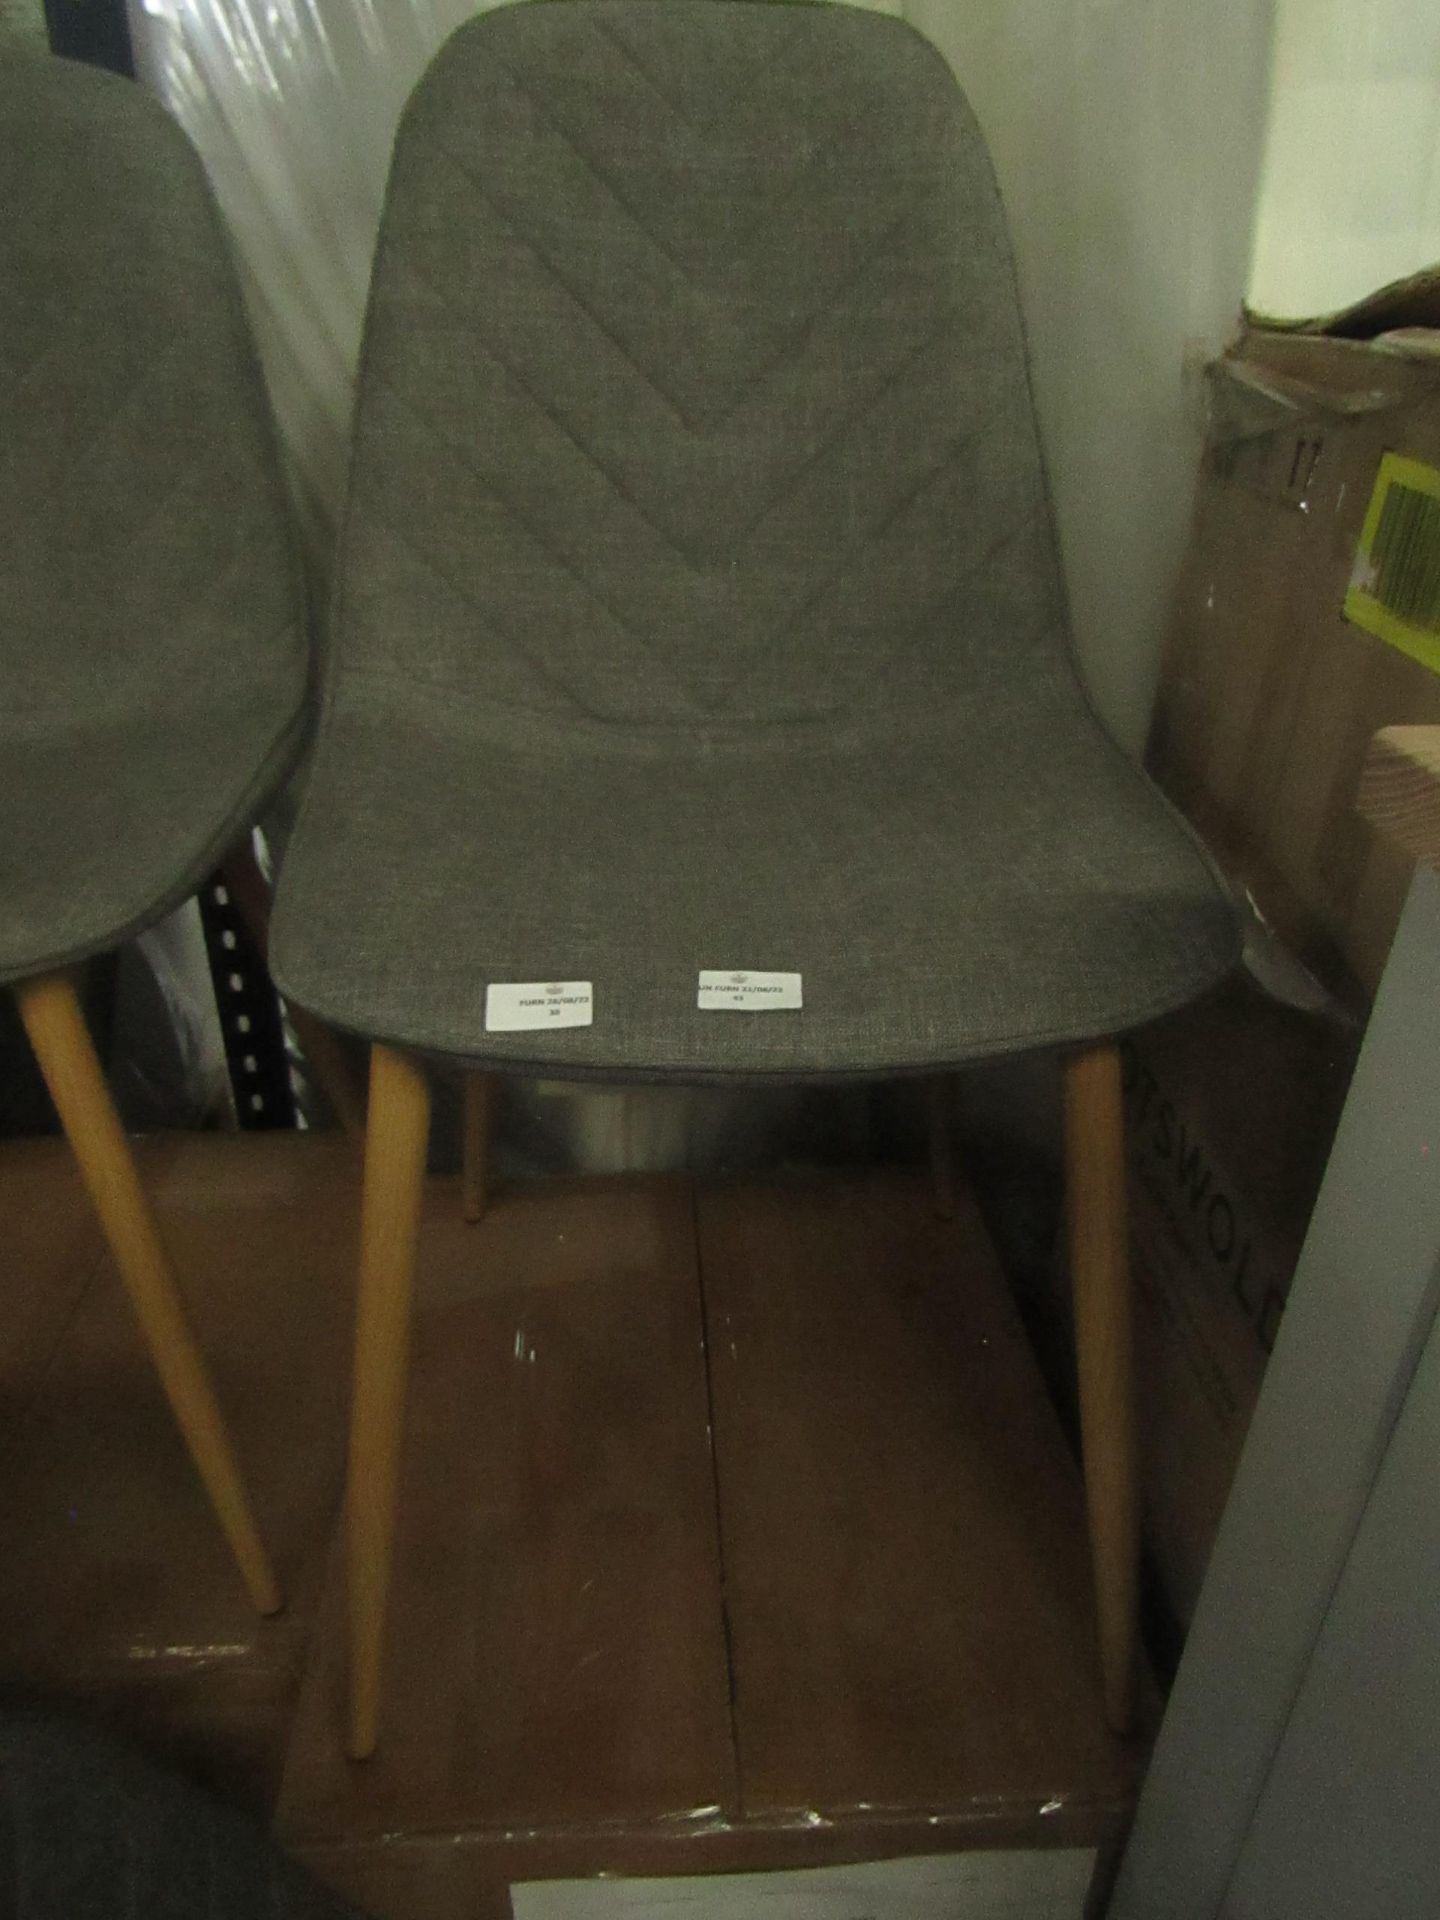 Cotswold Company Modern Upholstered Dining Chair - Grey 3 RRP Â£150.00 - This item looks to be in